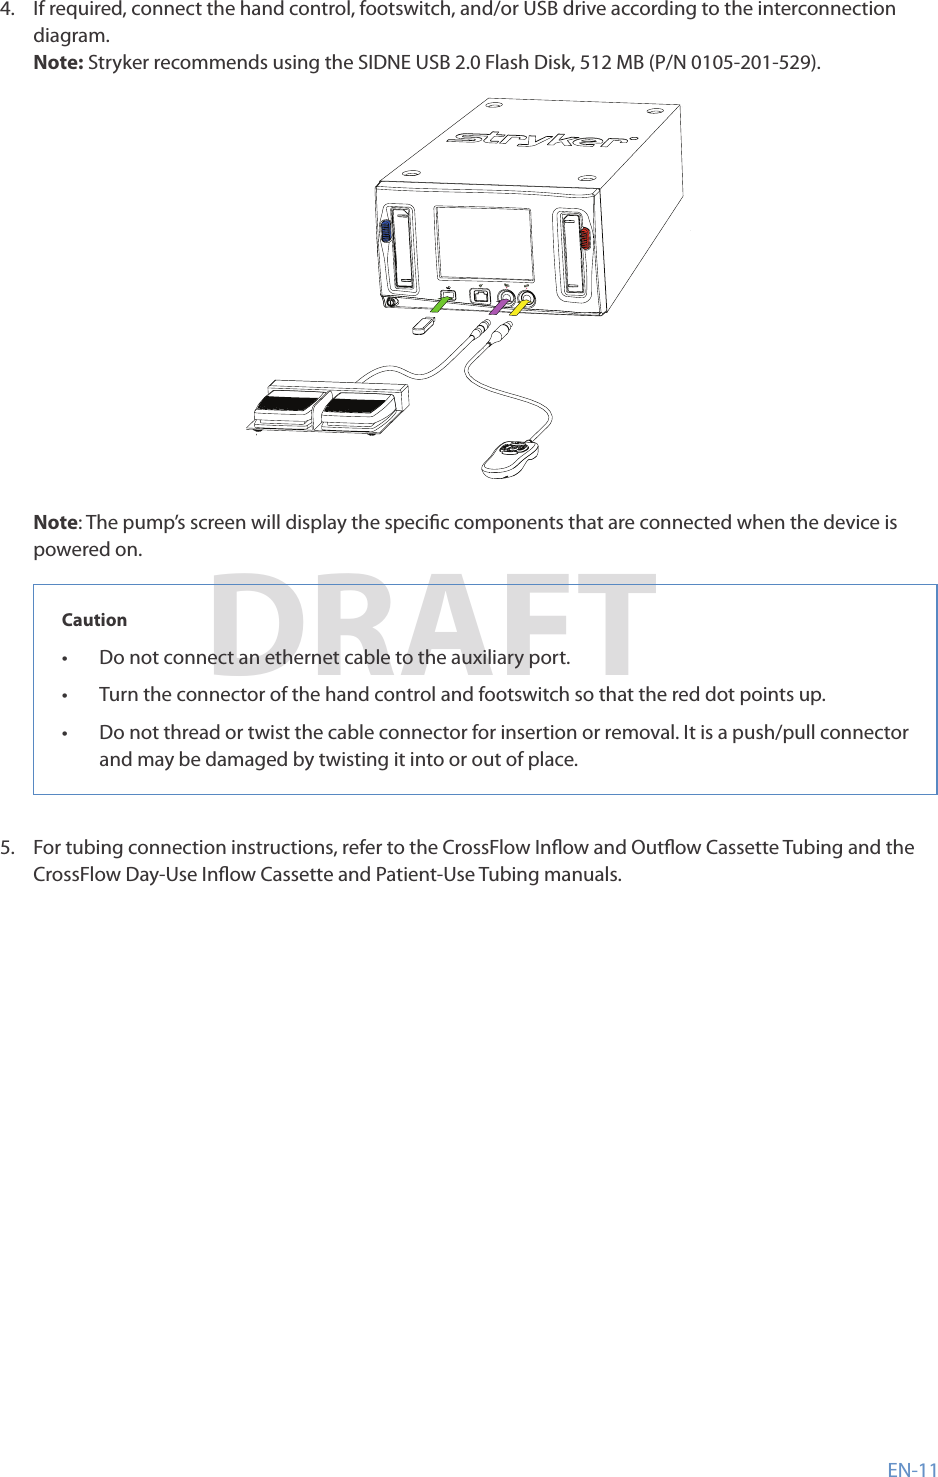 EN-11DRAFT4�  If required, connect the hand control, footswitch, and/or USB drive according to the interconnection diagram�Note: Stryker recommends using the SIDNE USB2�0 Flash Disk, 512MB (P/N 0105-201-529)�Note: The pump’s screen will display the specic components that are connected when the device is powered on�Caution•  Do not connect an ethernet cable to the auxiliary port�•  Turn the connector of the hand control and footswitch so that the red dot points up�•  Do not thread or twist the cable connector for insertion or removal� It is a push/pull connector and may be damaged by twisting it into or out of place�5�  For tubing connection instructions, refer to the CrossFlow Inow and Outow Cassette Tubing and the CrossFlow Day-Use Inow Cassette and Patient-Use Tubing manuals�